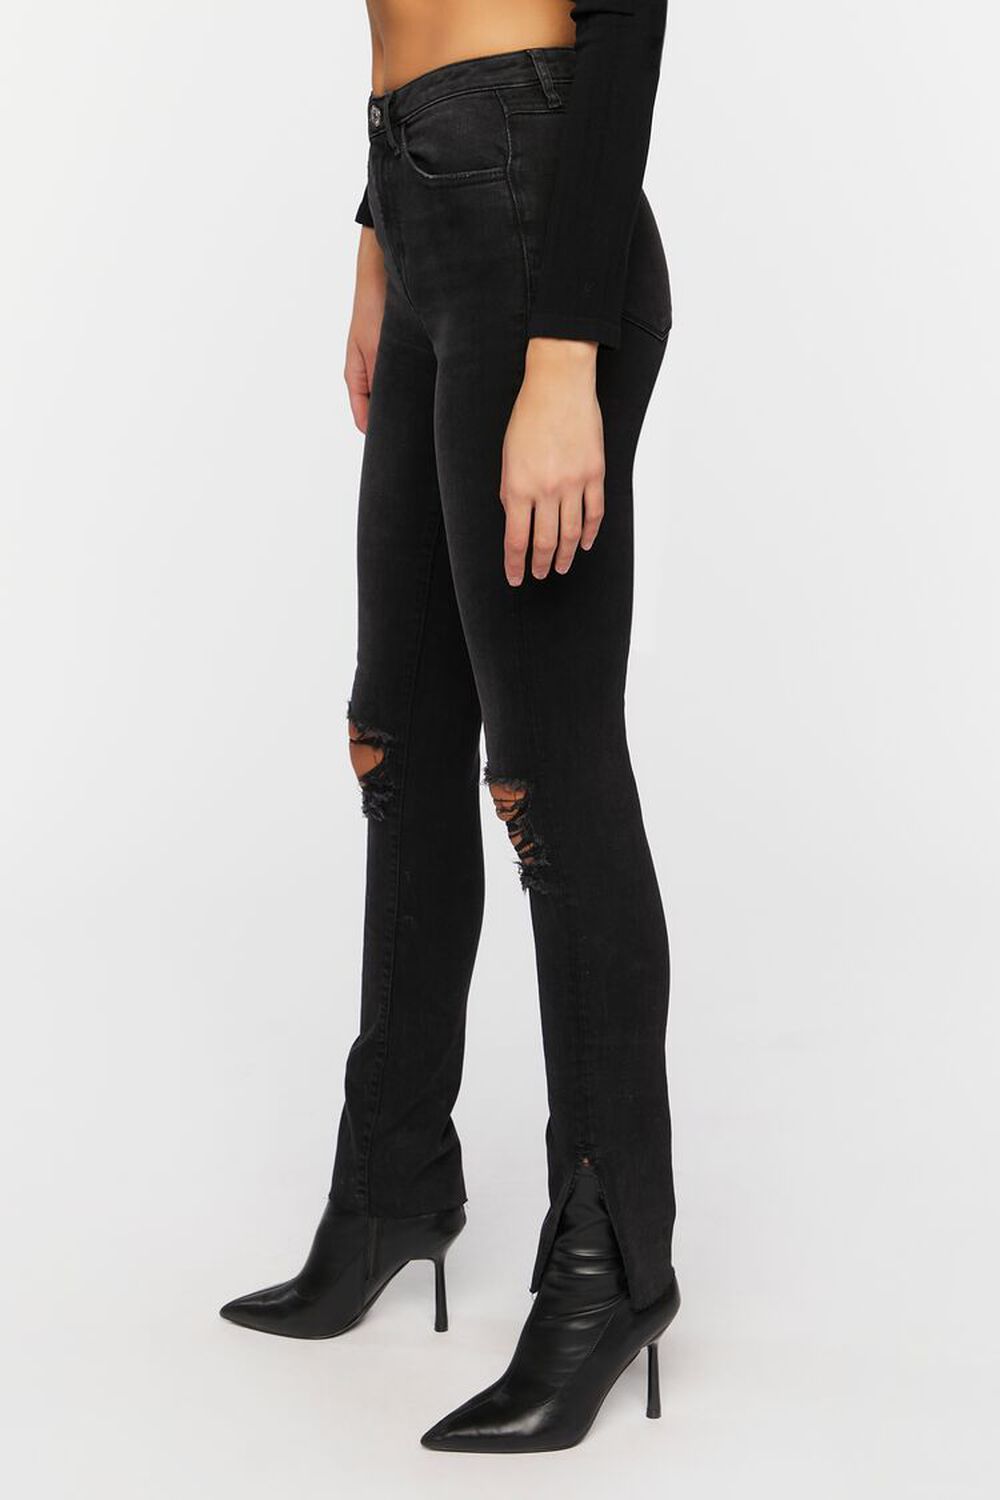 WASHED BLACK Distressed-Knee High-Rise Skinny Jeans, image 2